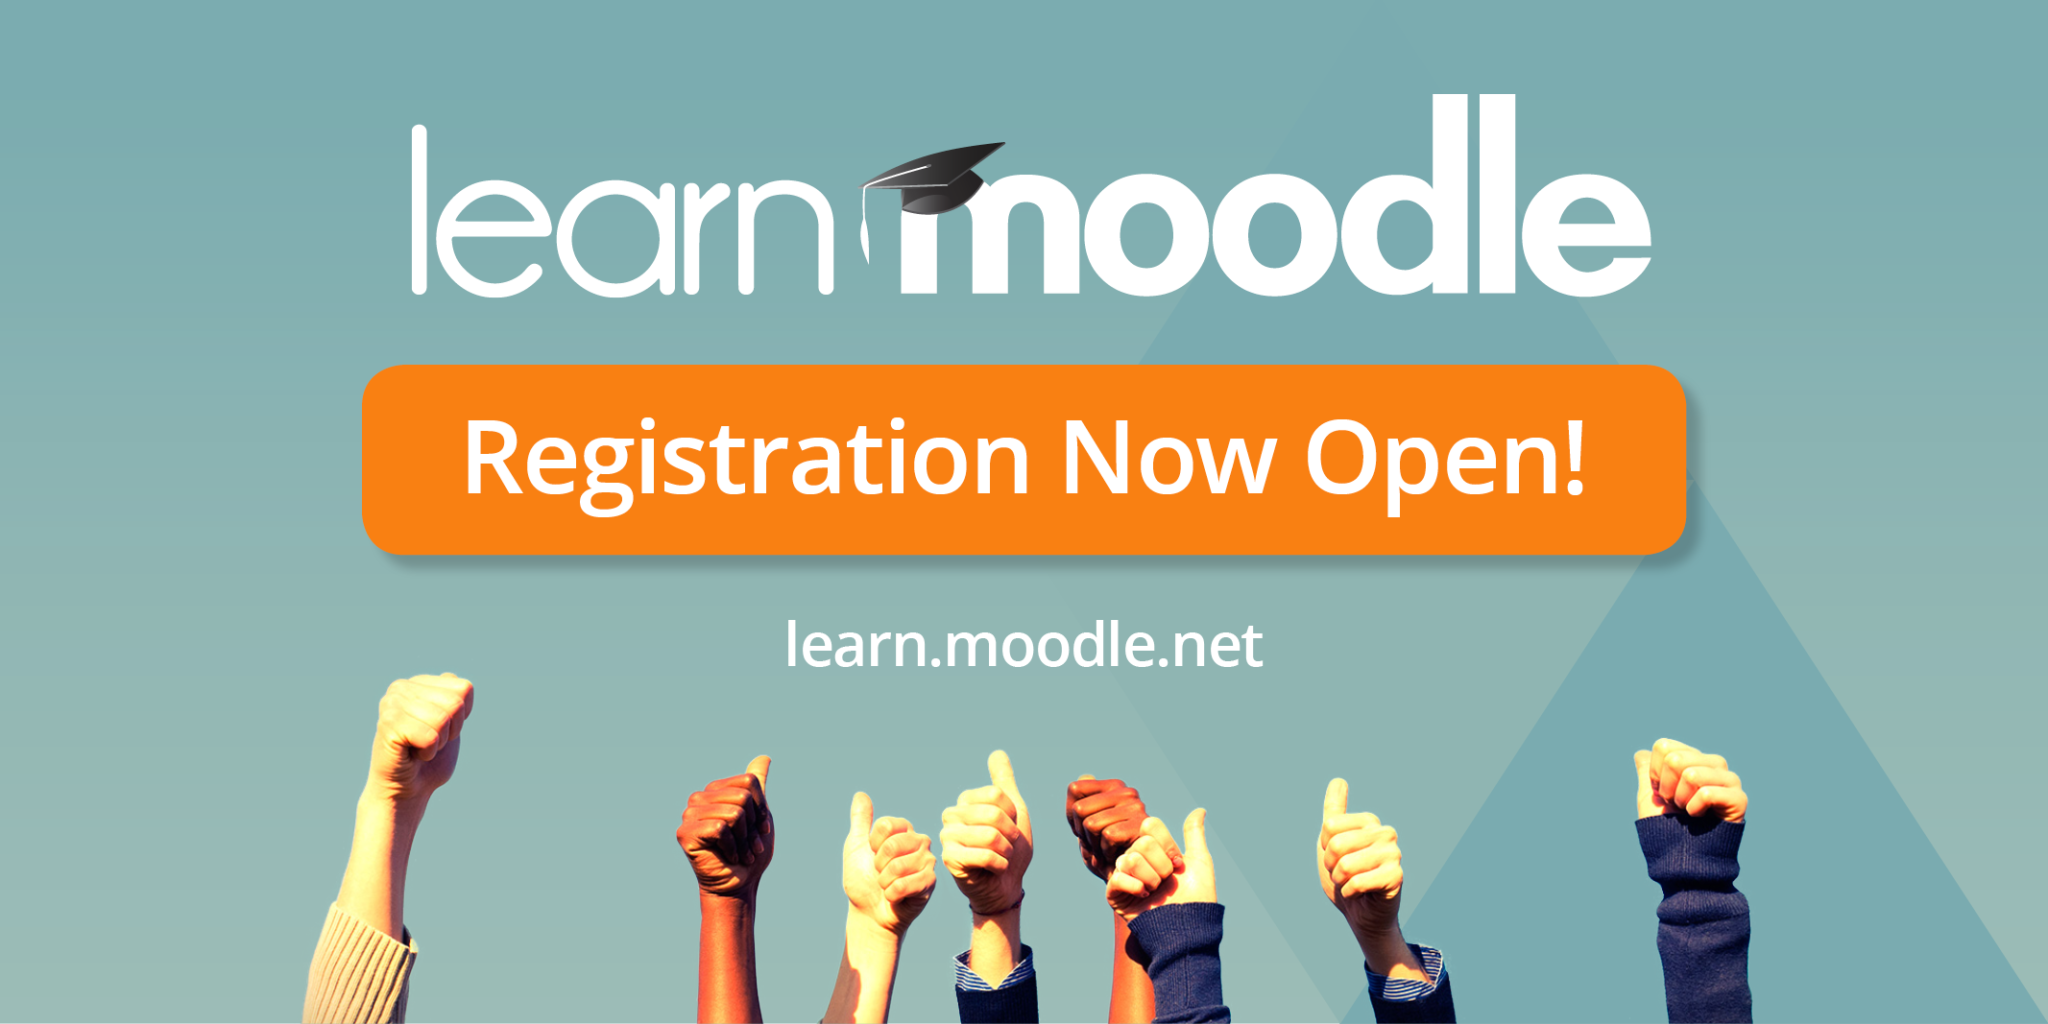 LearnMoodle 14 Dec 2016 Post 1